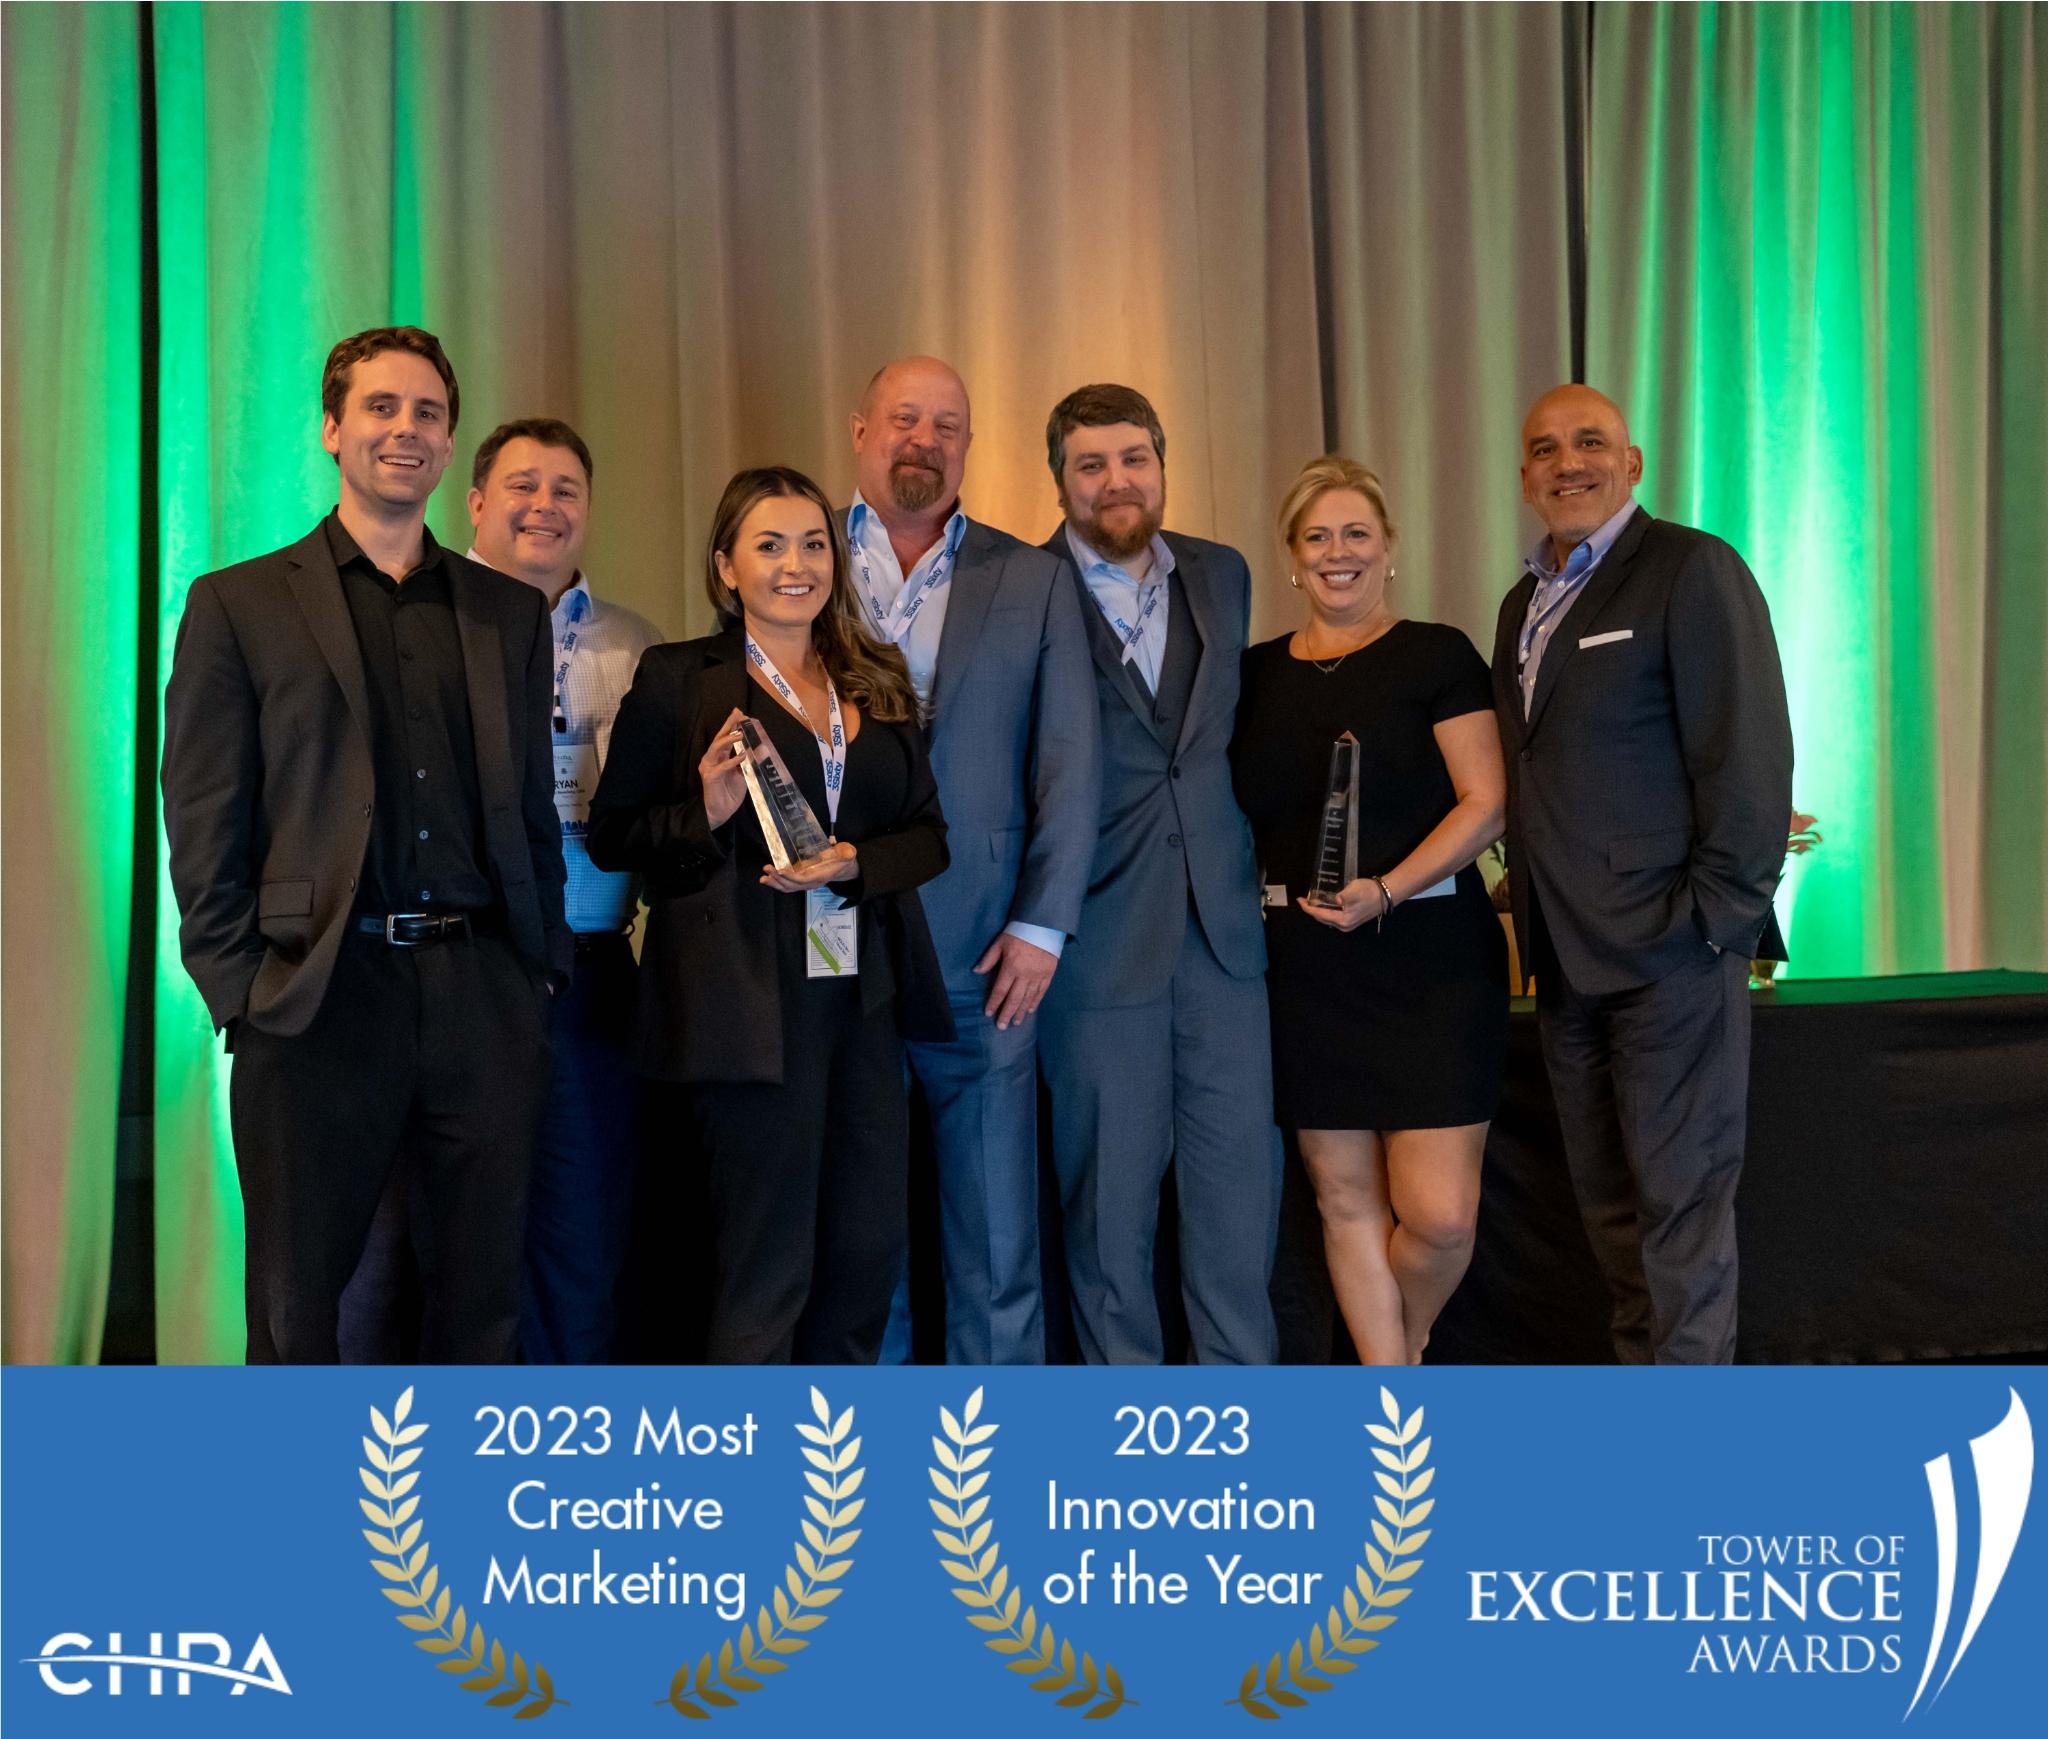 3Sixty picks up two wins at the 2023 CHPA Tower of Excellence Awards